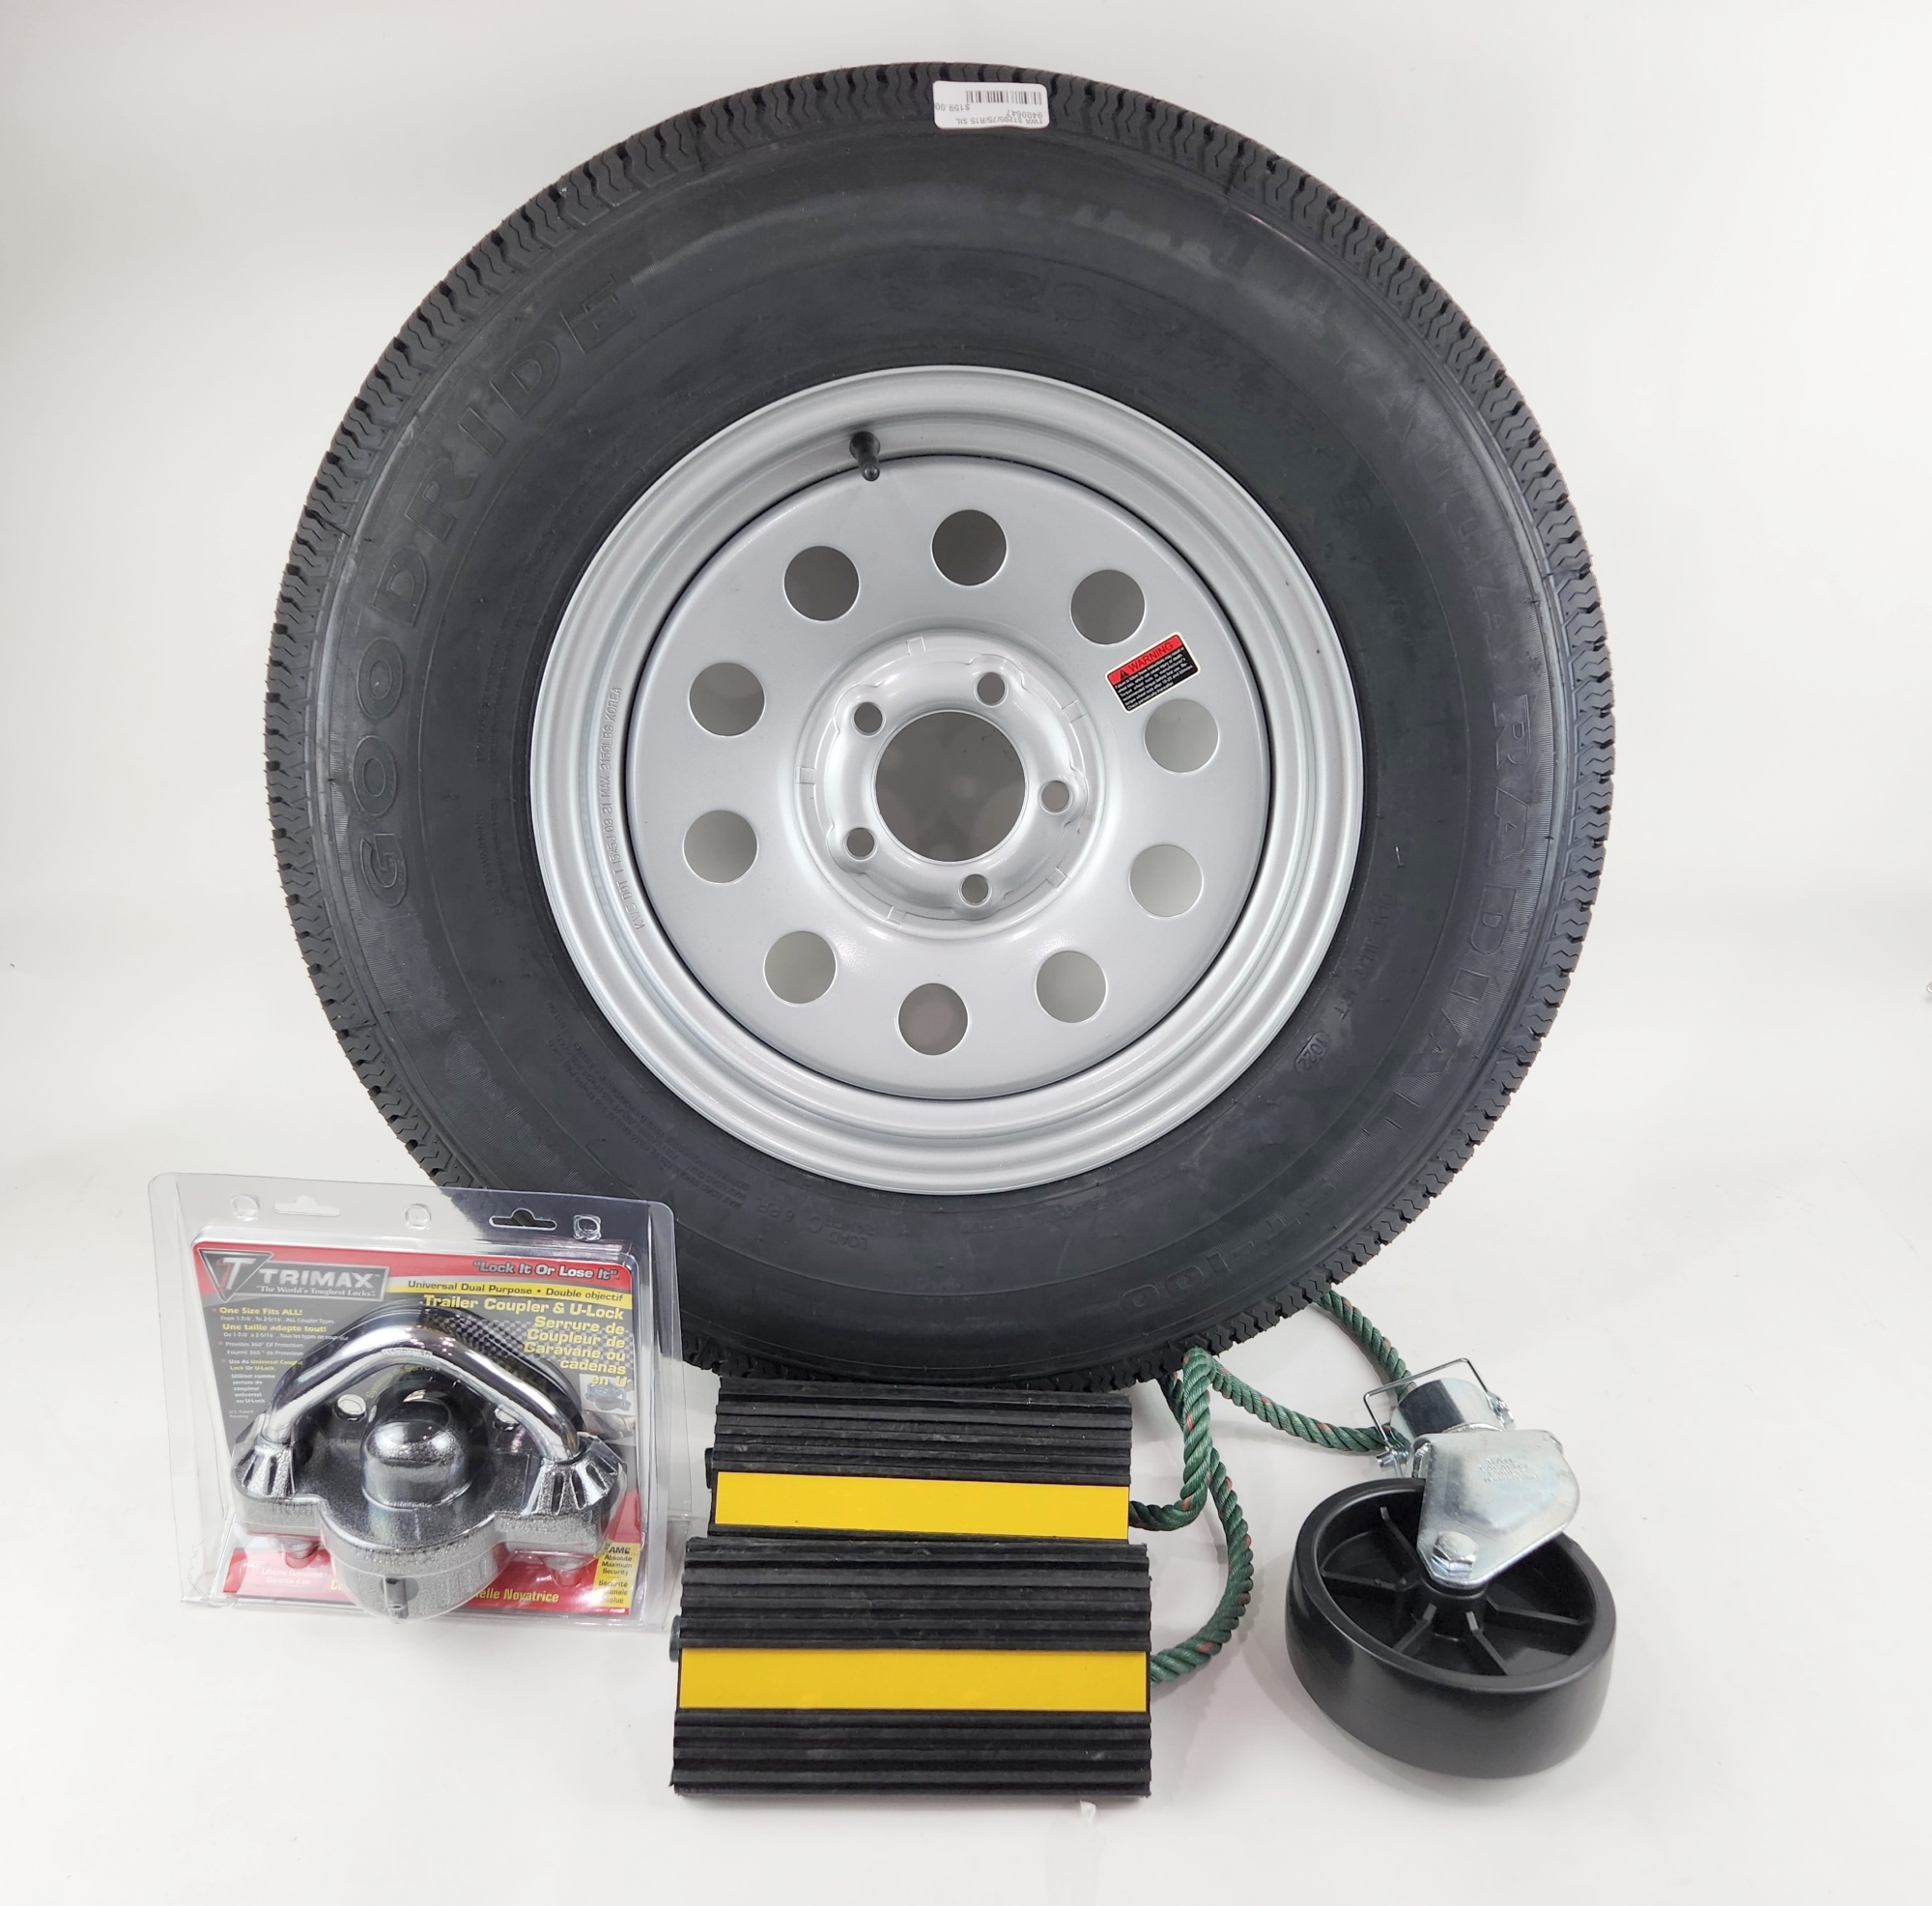 Special Accessory Kit for Steel Utility Trailers - Spare Tire, Wheel Chocks, Coupler Lock and Caster Wheel